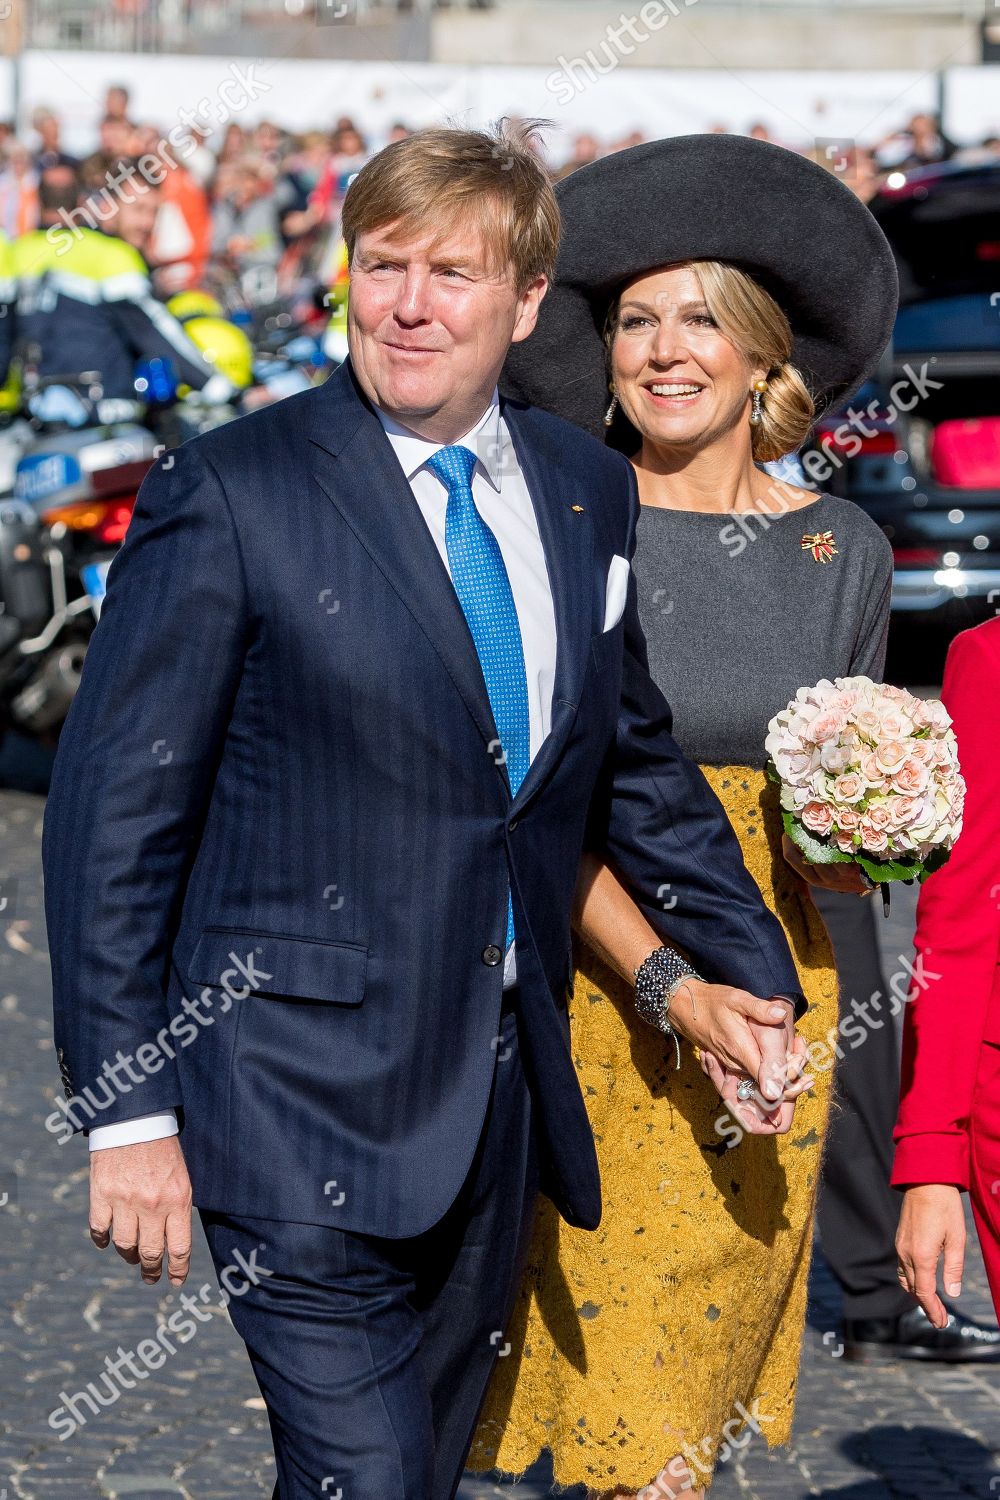 king-willem-alexander-and-queen-maxima-visit-to-germany-shutterstock-editorial-9921325o.jpg